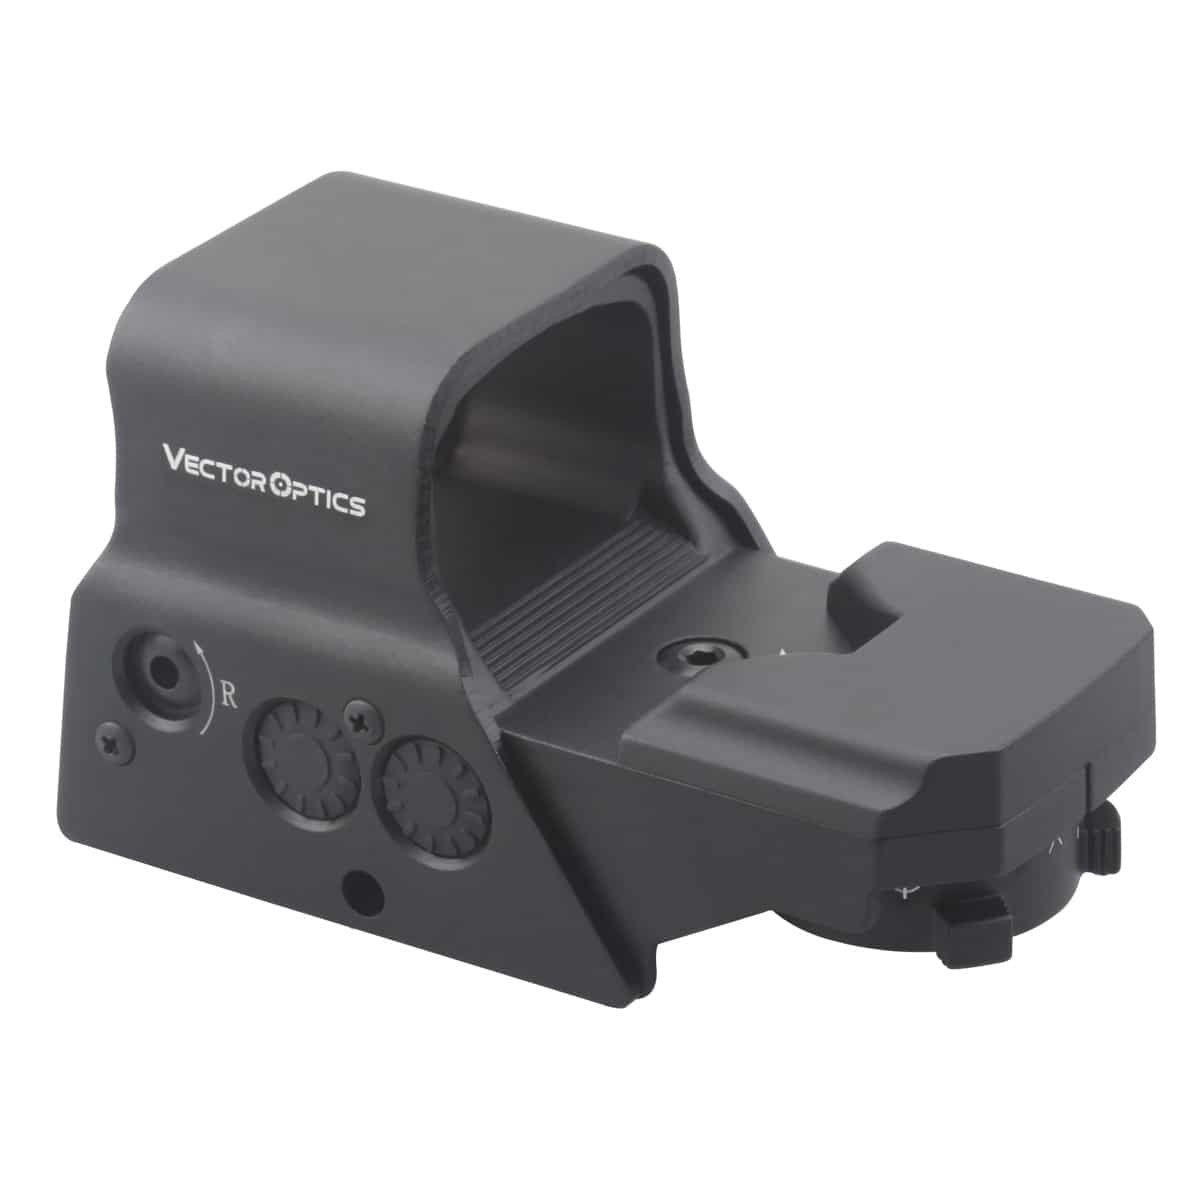 Omega 8 Reticle Red Dot Sight